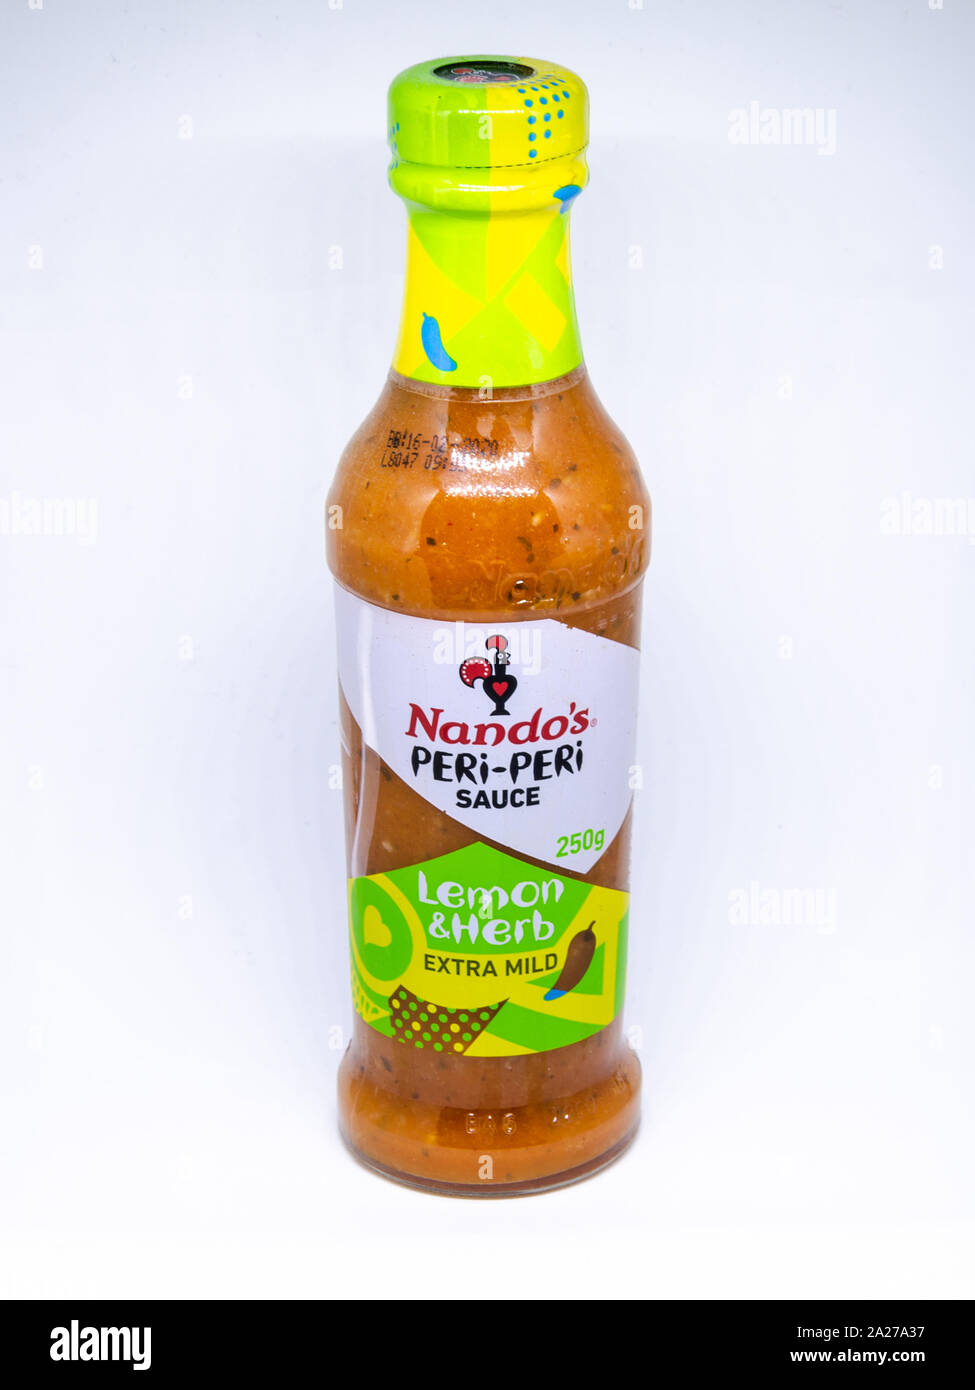 A jar of Nando's Peri-Peri lemon and herb flavour sauce pictured against a white background. Stock Photo